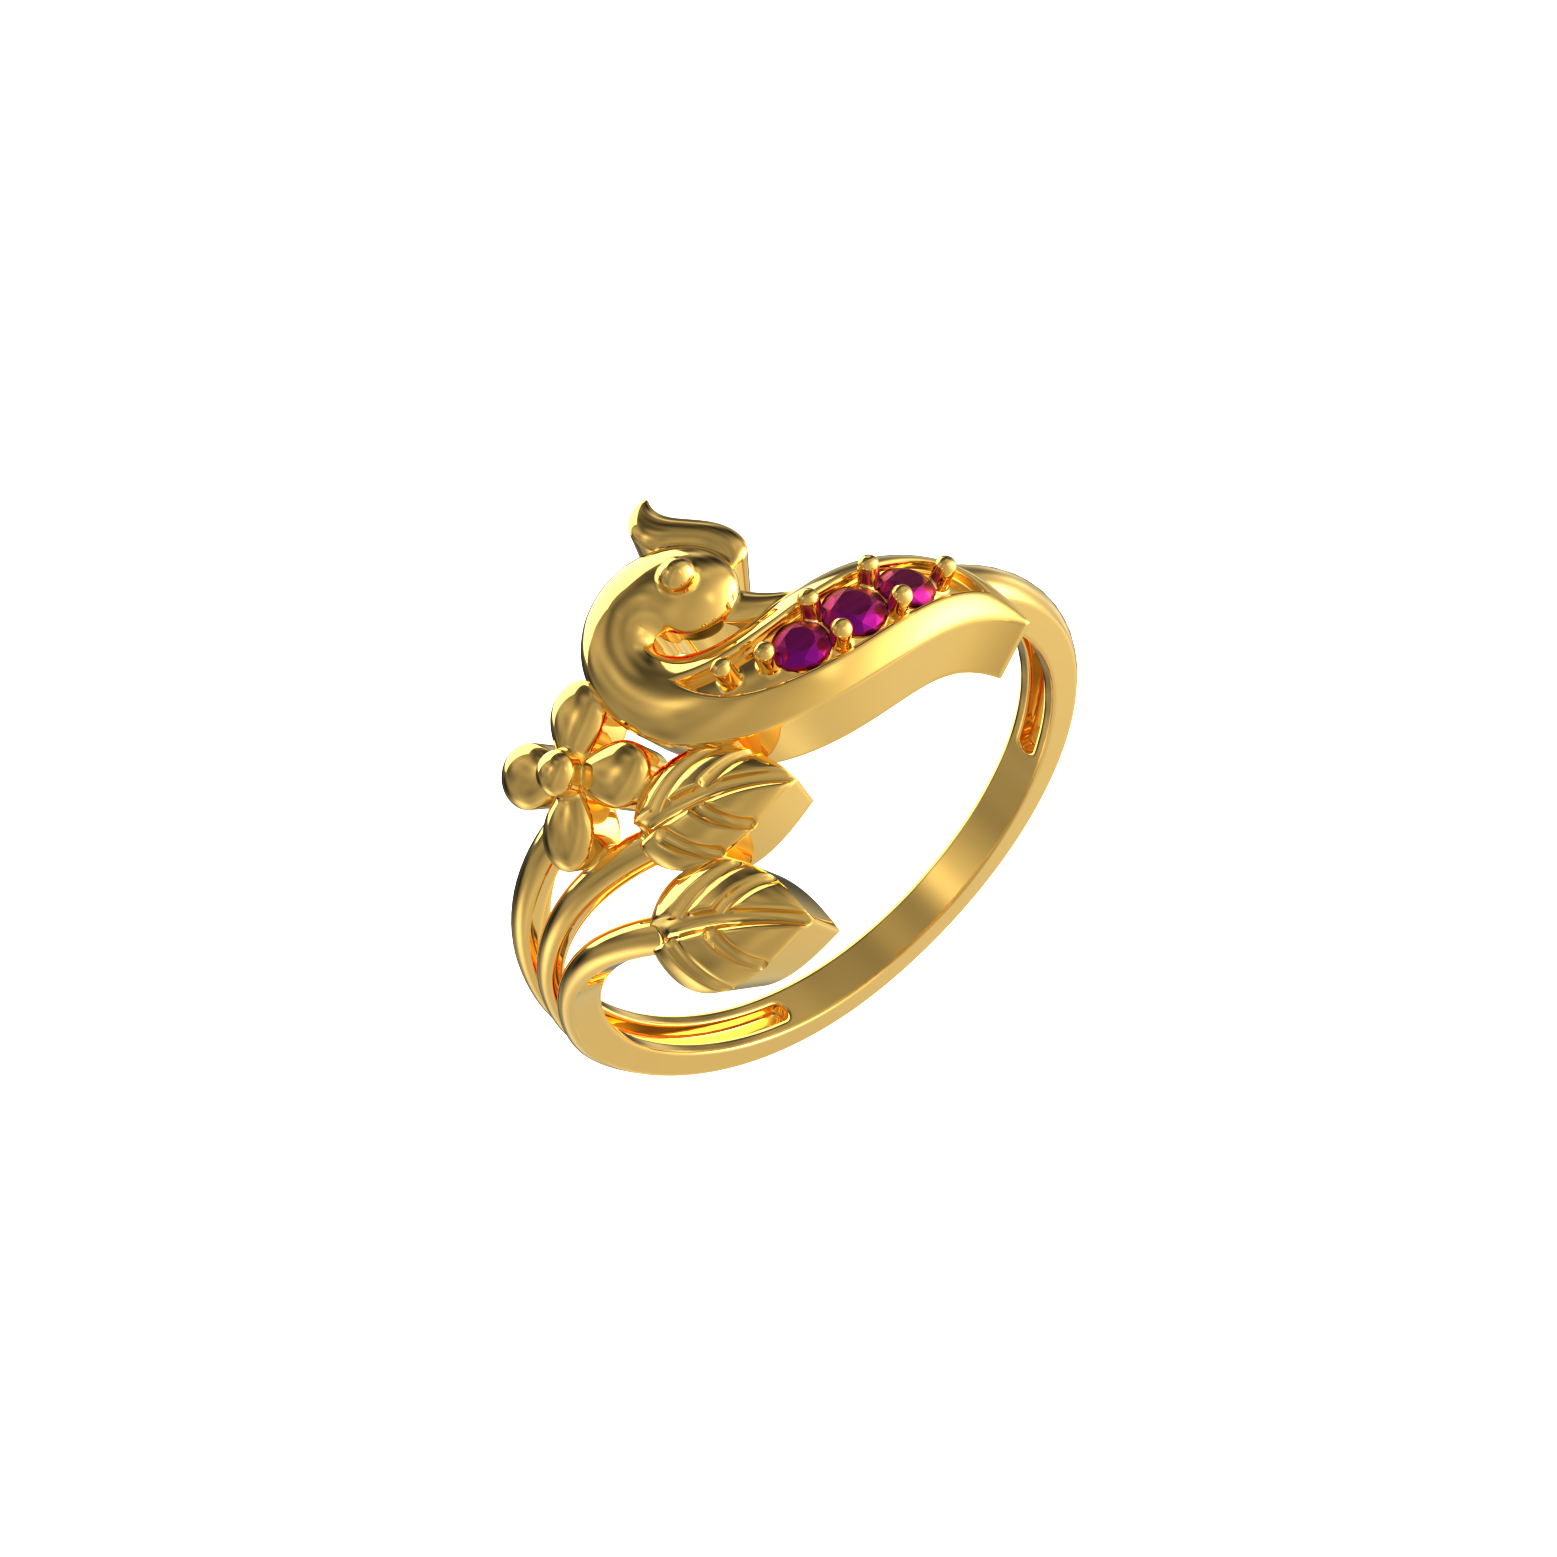 Gold Ring Designs For Females Without Stones - Pre-engagement Ring, HD Png  Download , Transparent Png Image - PNGitem